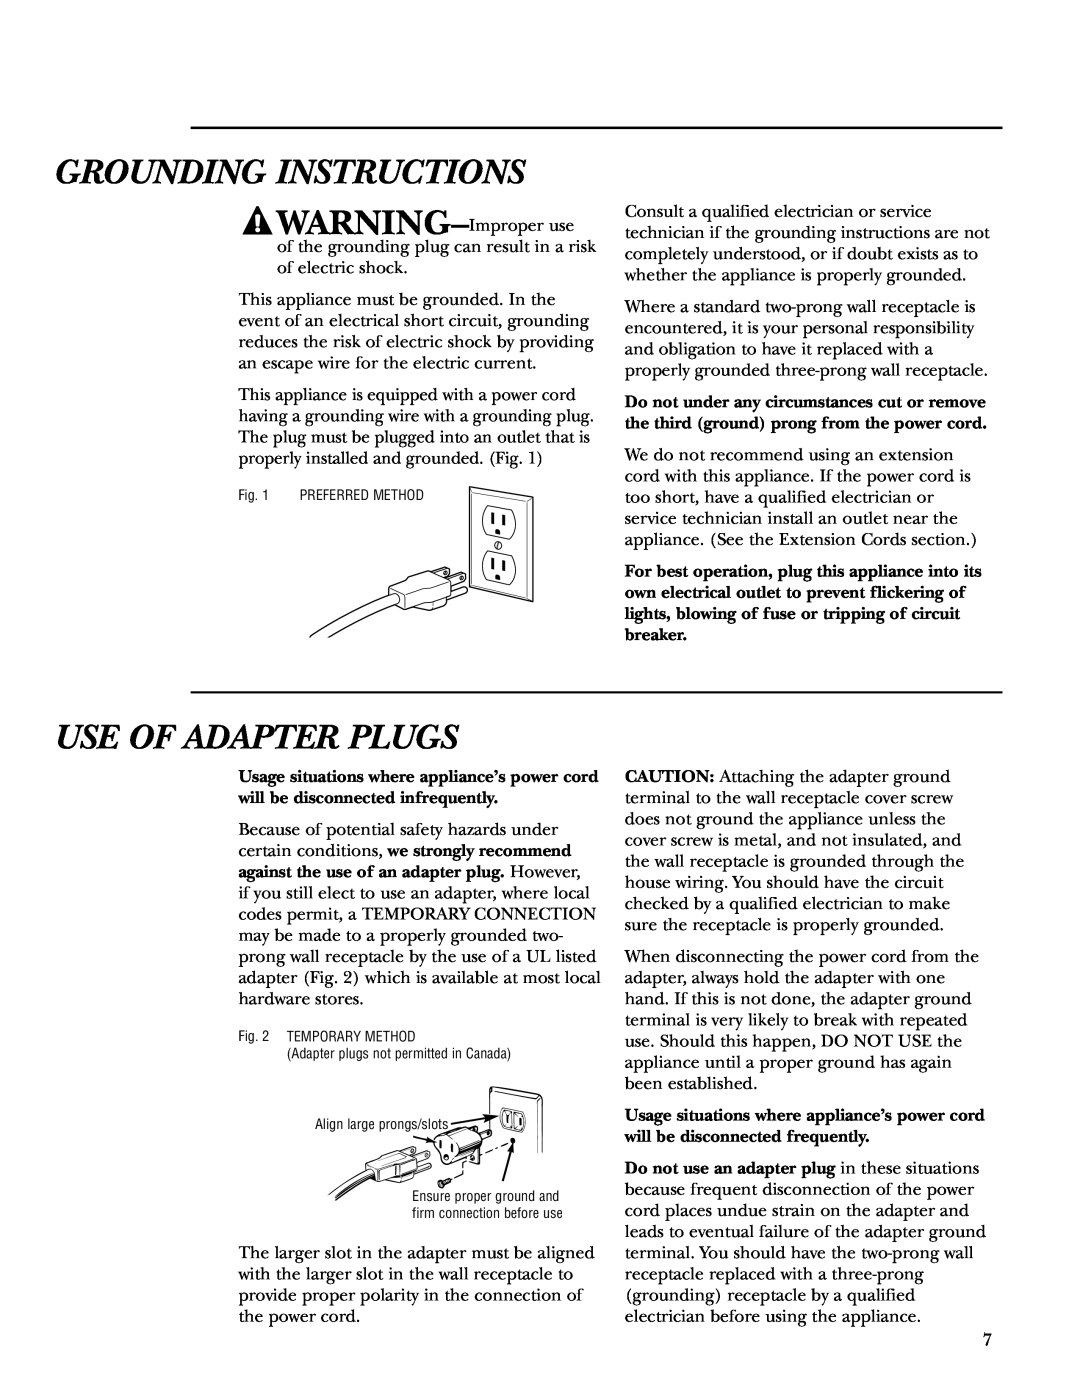 GE ZE2160 owner manual Grounding Instructions, Use Of Adapter Plugs 